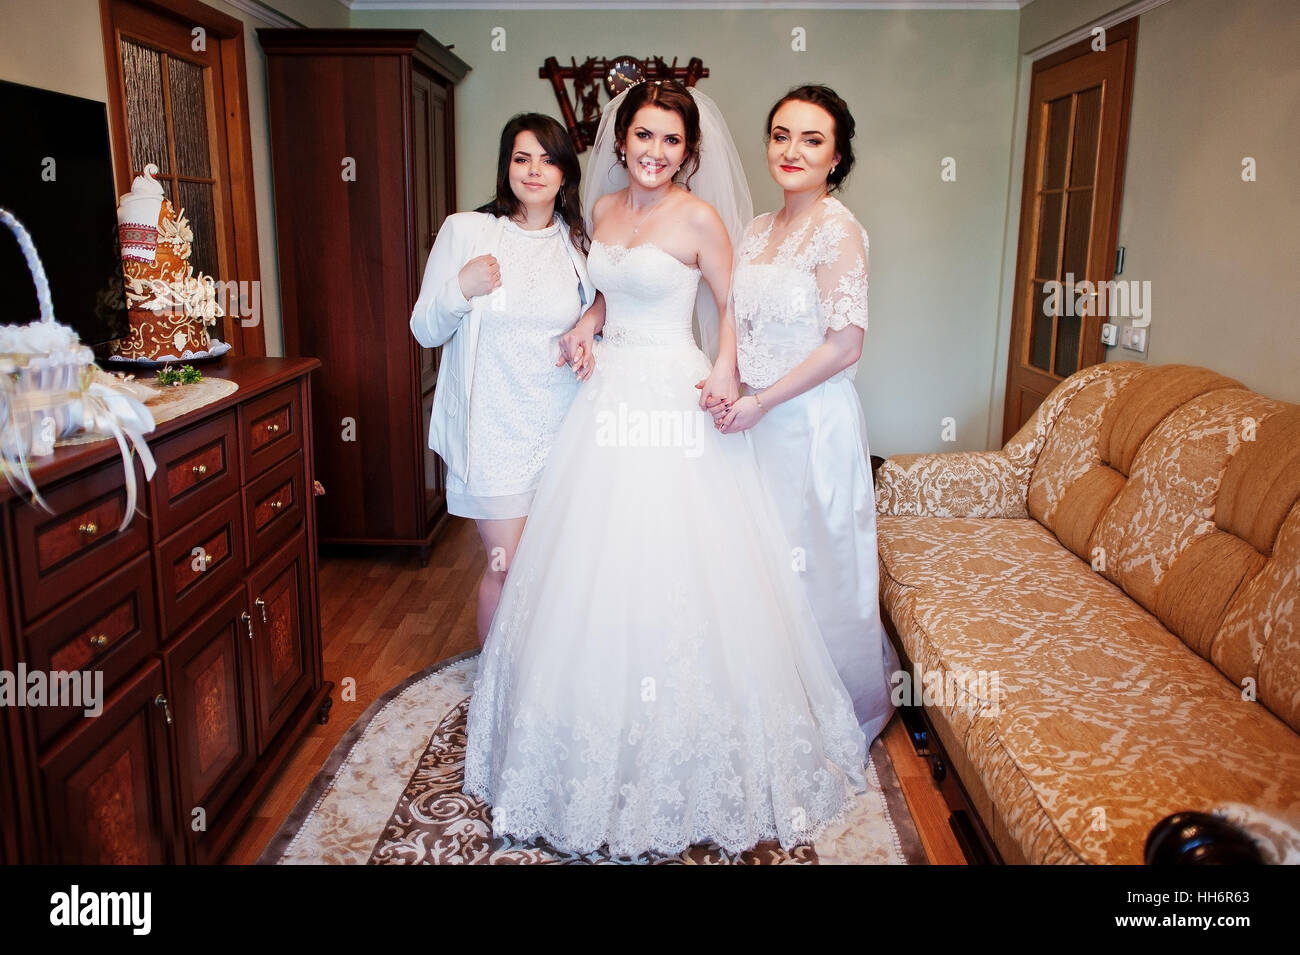 Elegance brunette bride with bridesmaids posed at her room on wedding morning day. Stock Photo